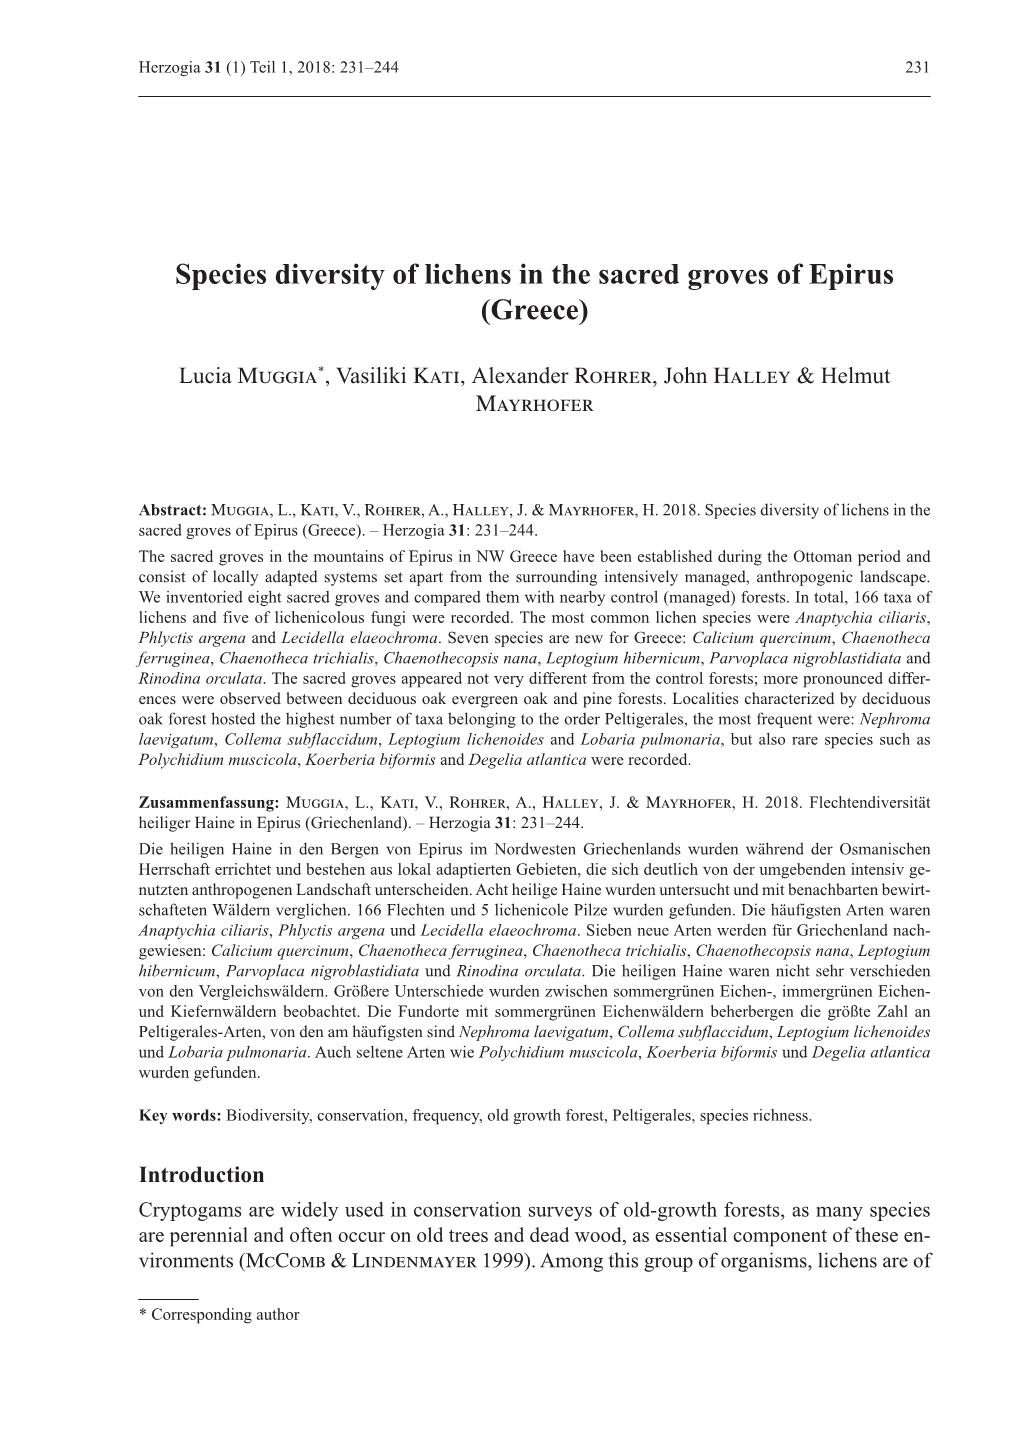 Species Diversity of Lichens in the Sacred Groves of Epirus (Greece)